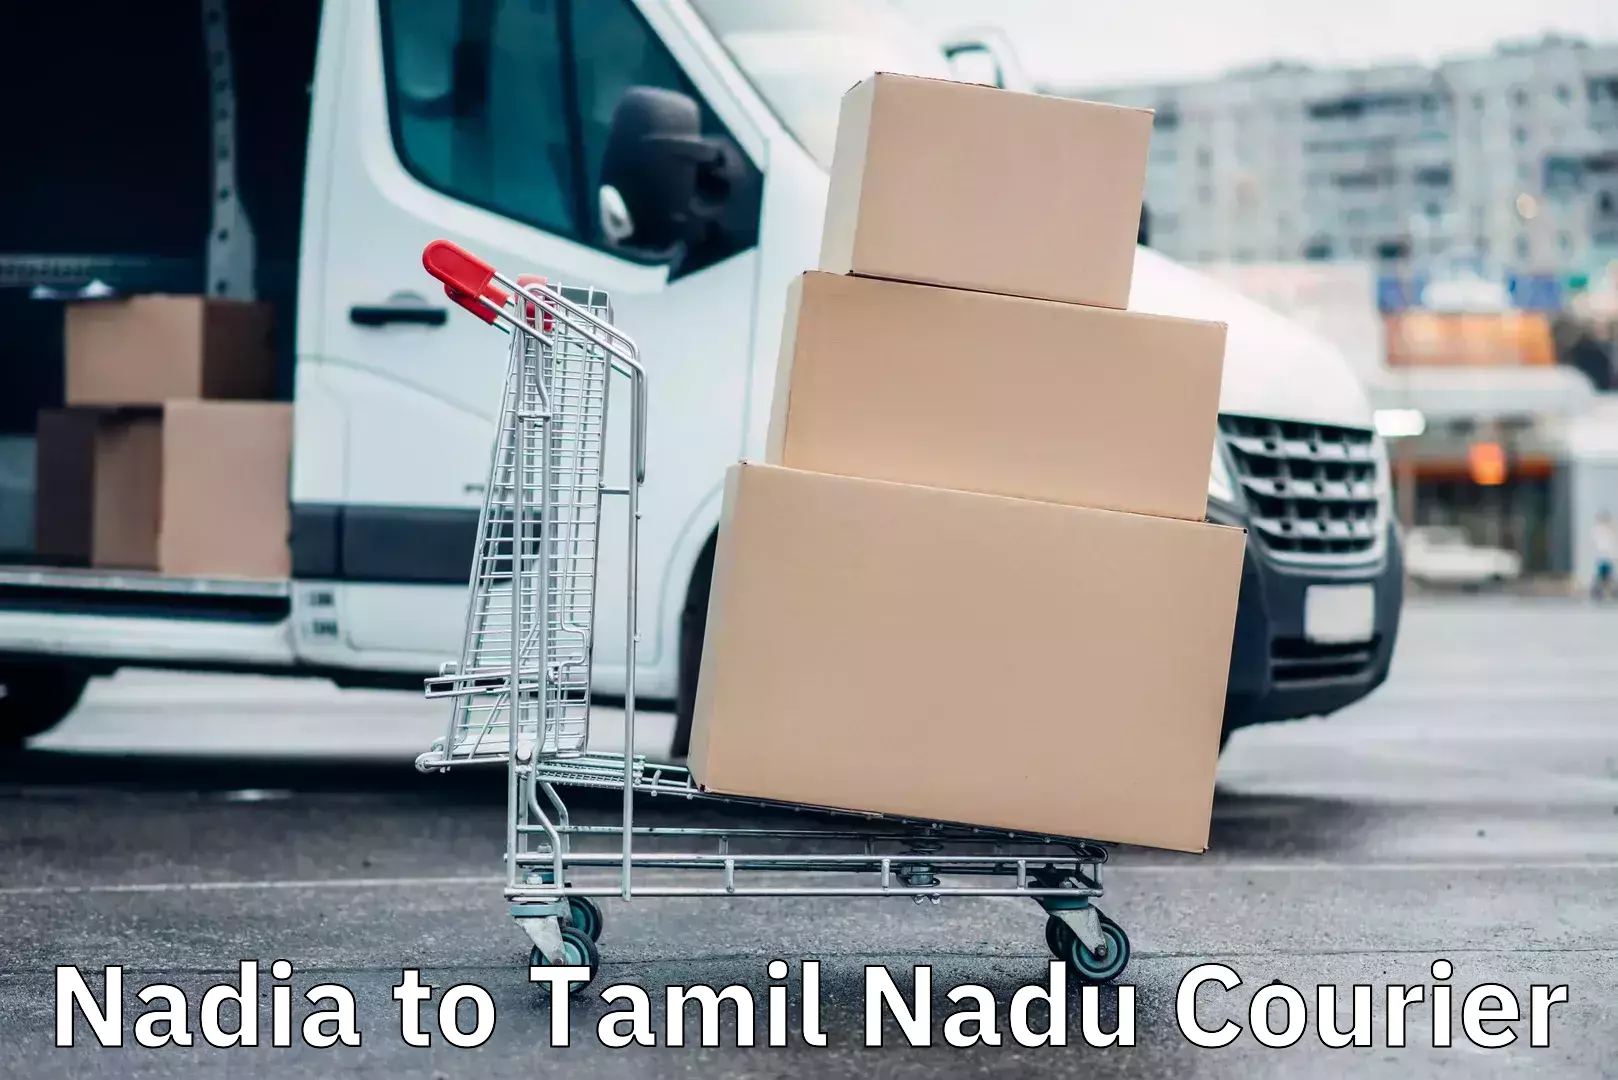 Courier service efficiency Nadia to Tuticorin Port